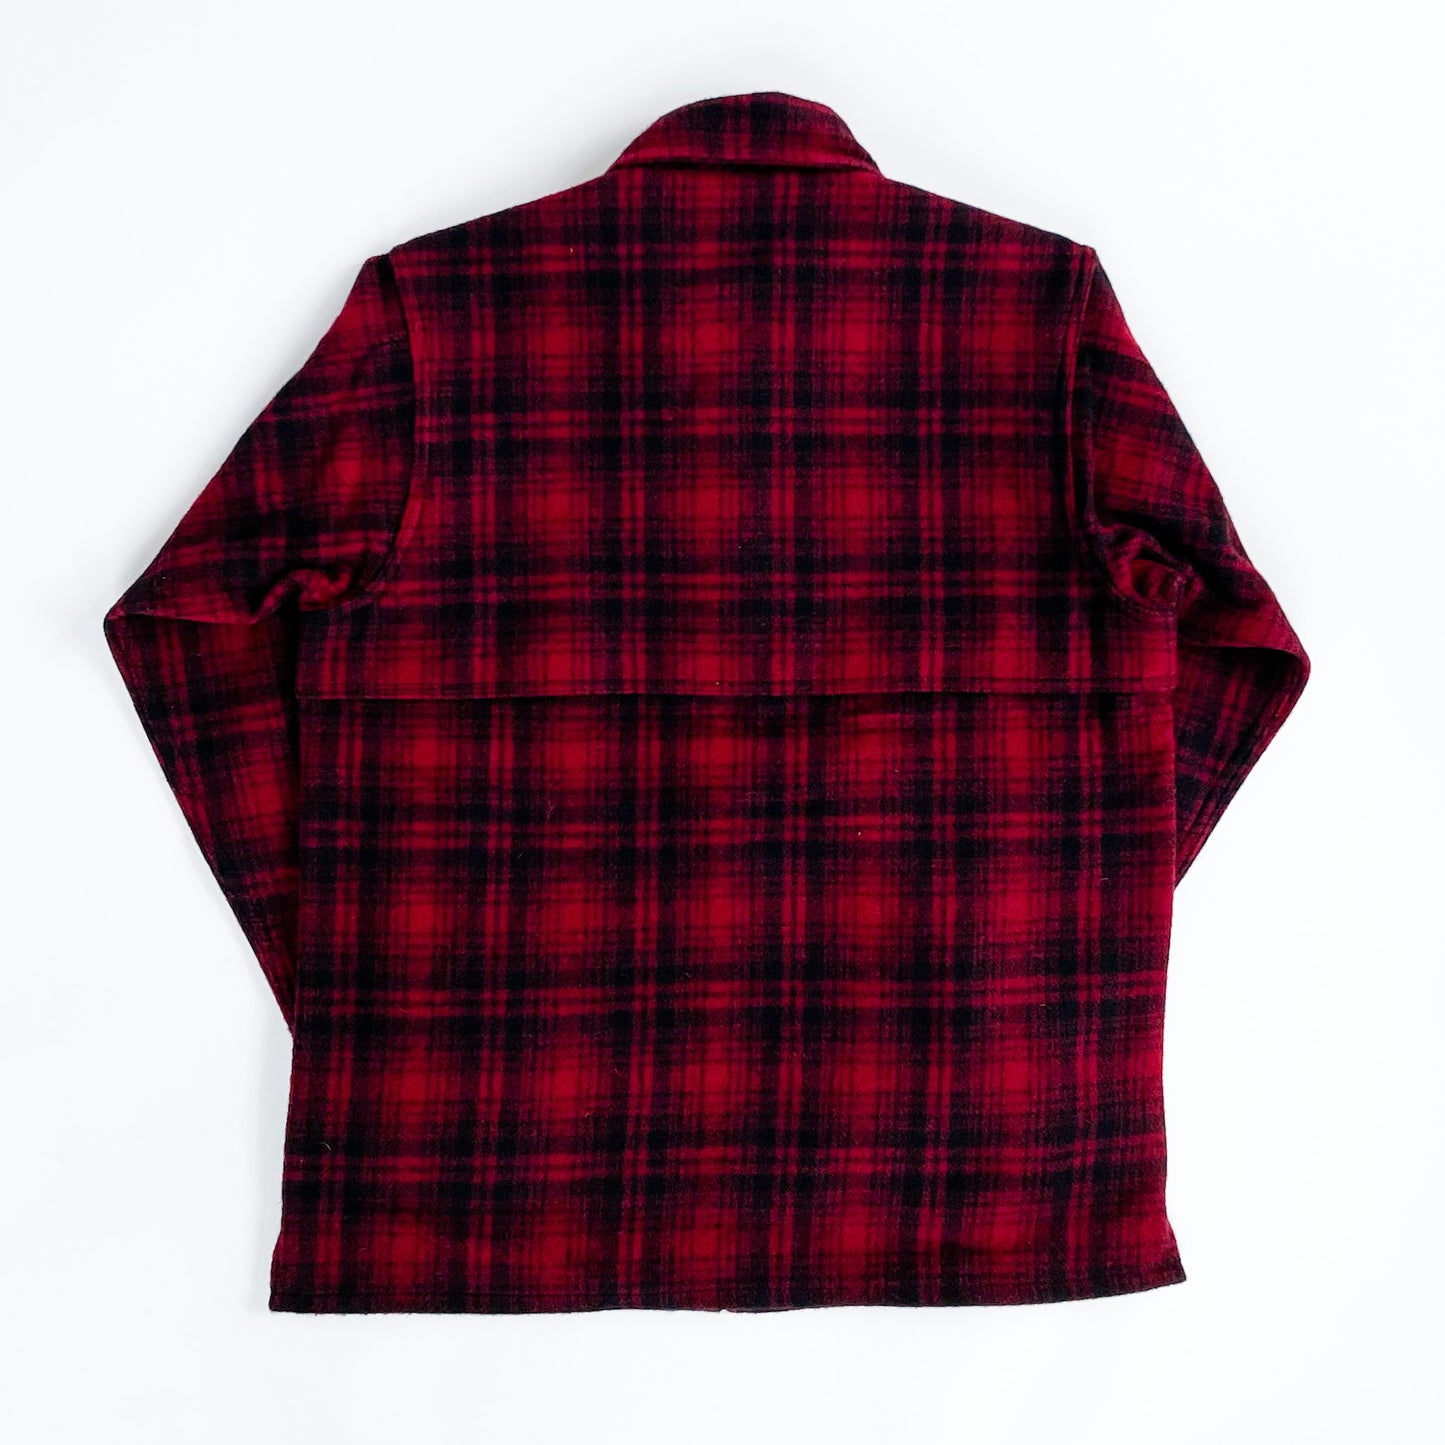 Double cape wool jac shirt - red and black muted plaid, back view